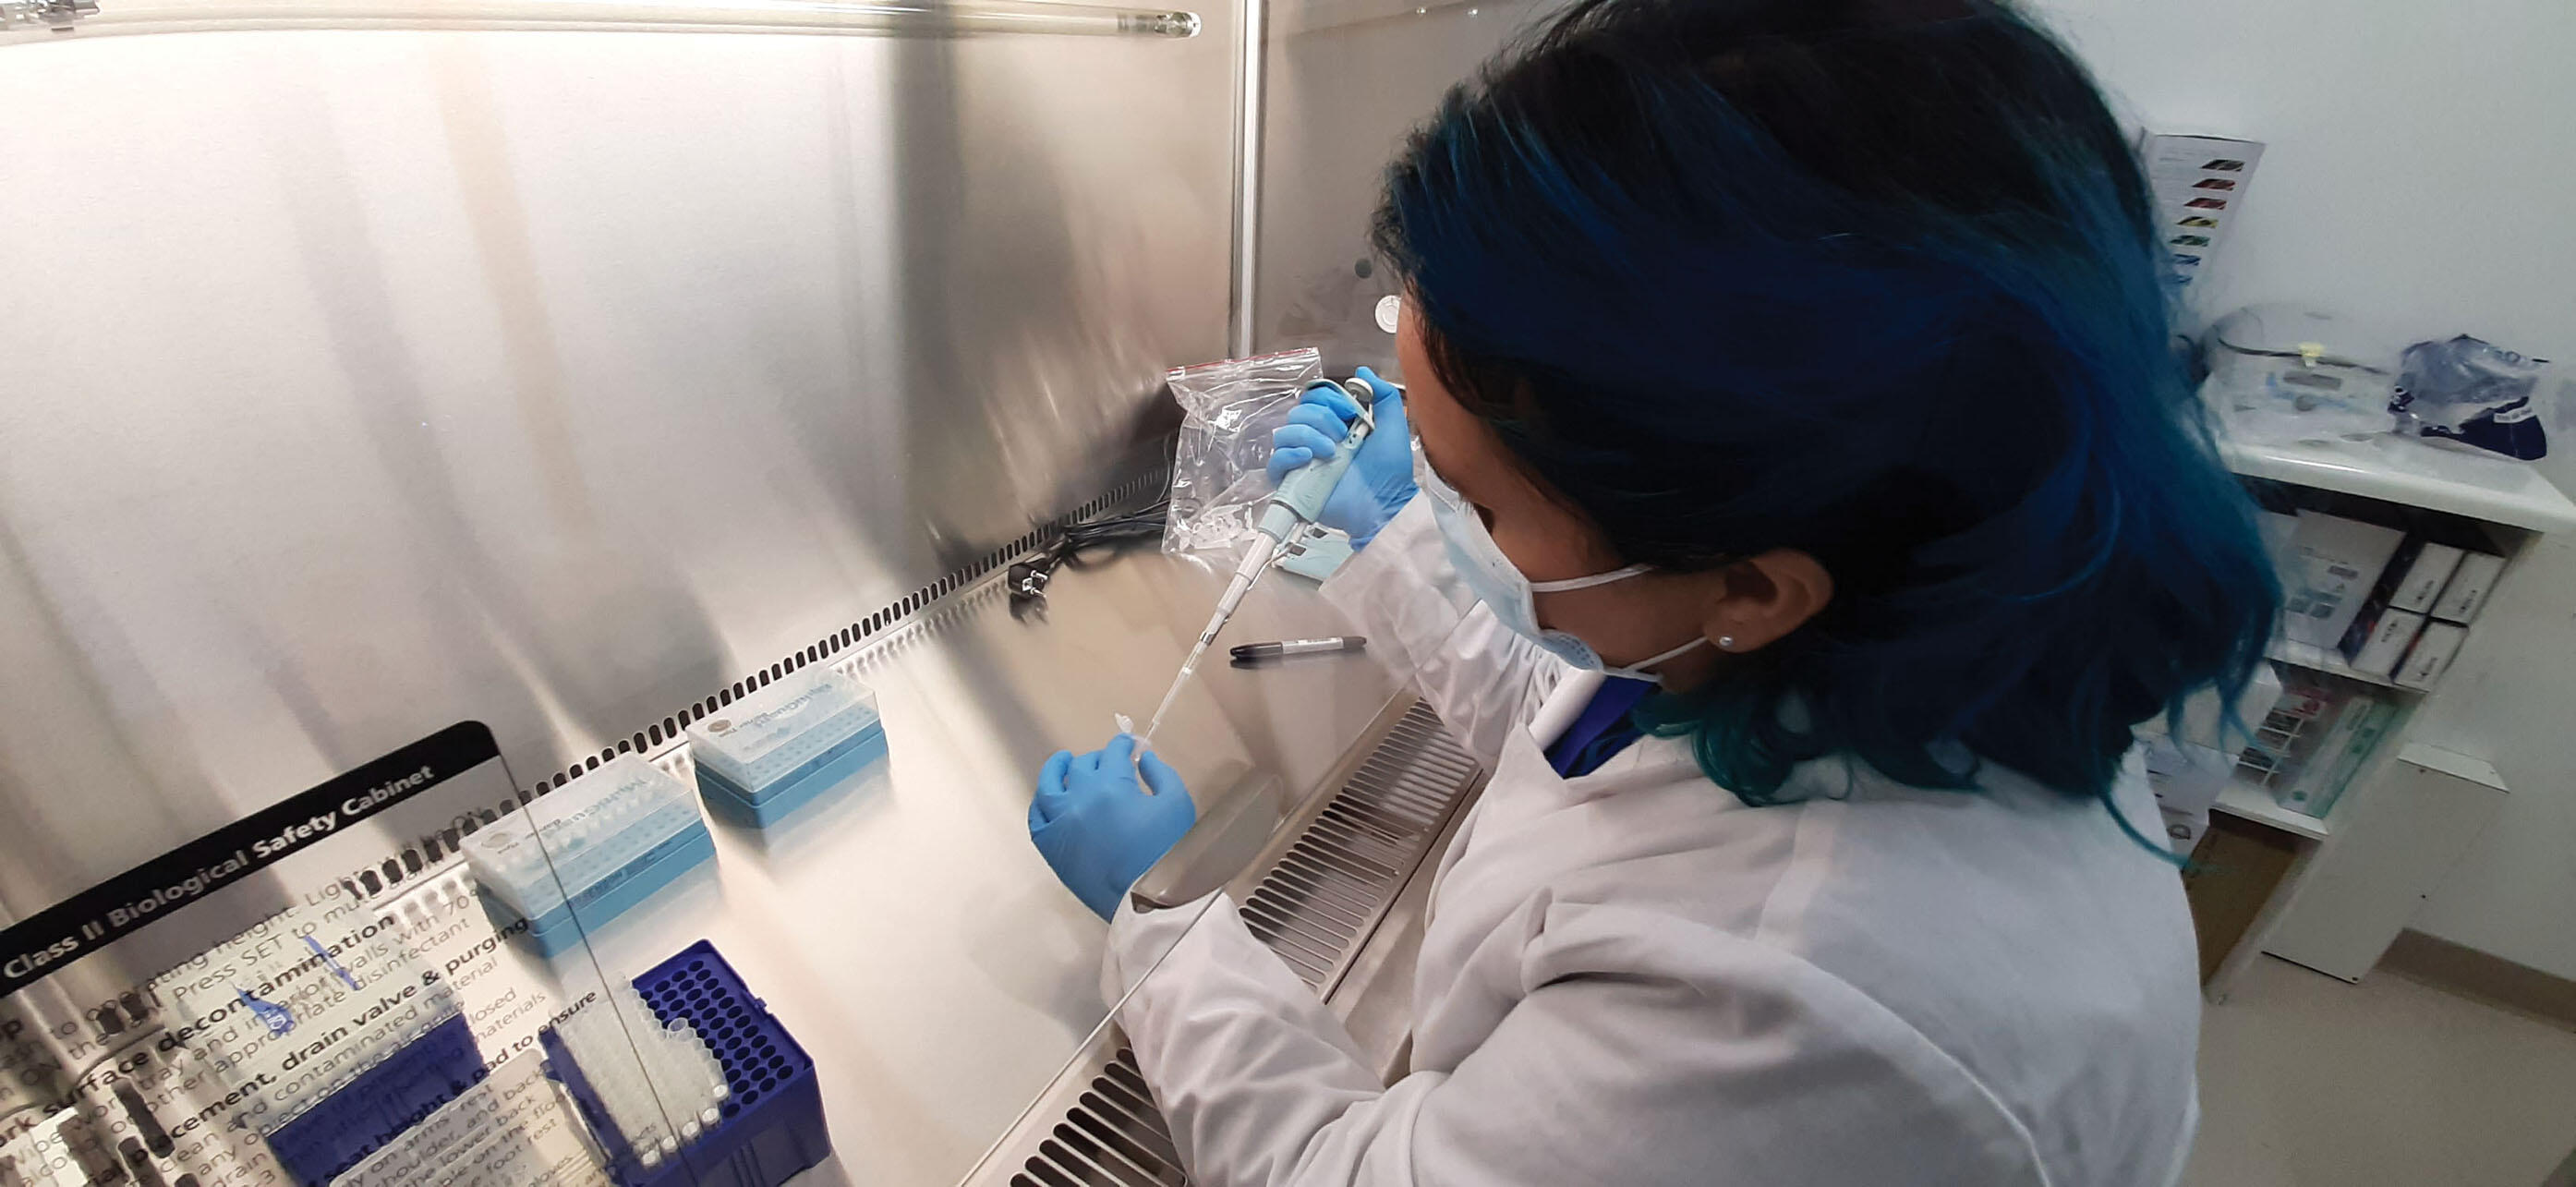 A biochemist uses pipettes and testing equipment provided by international donors to test for SARS-CoV-2 in Chile,  July 2020. (Photo courtesy of Hospital Claudio Vicuña/IAEA.)